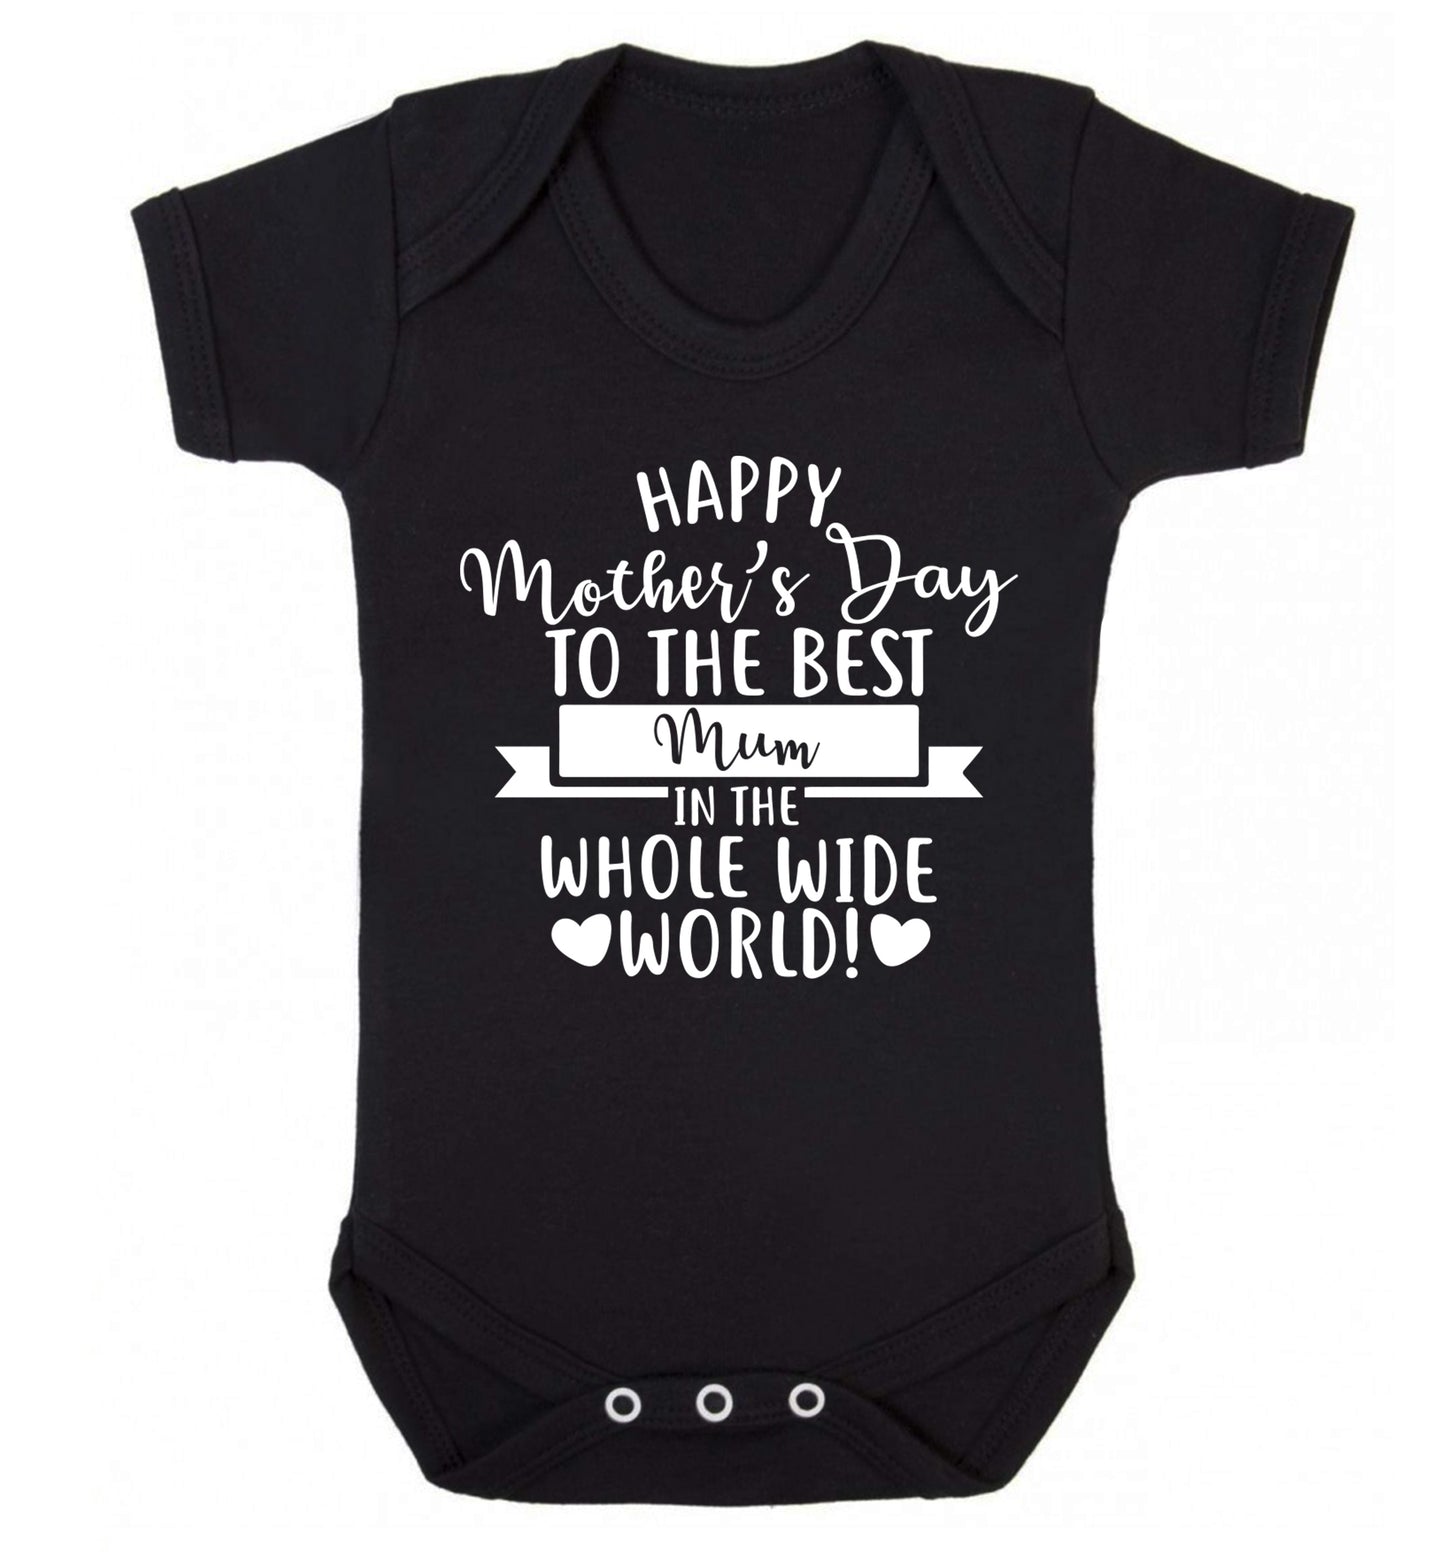 Happy Mother's Day to the best mum in the whole wide world! Baby Vest black 18-24 months